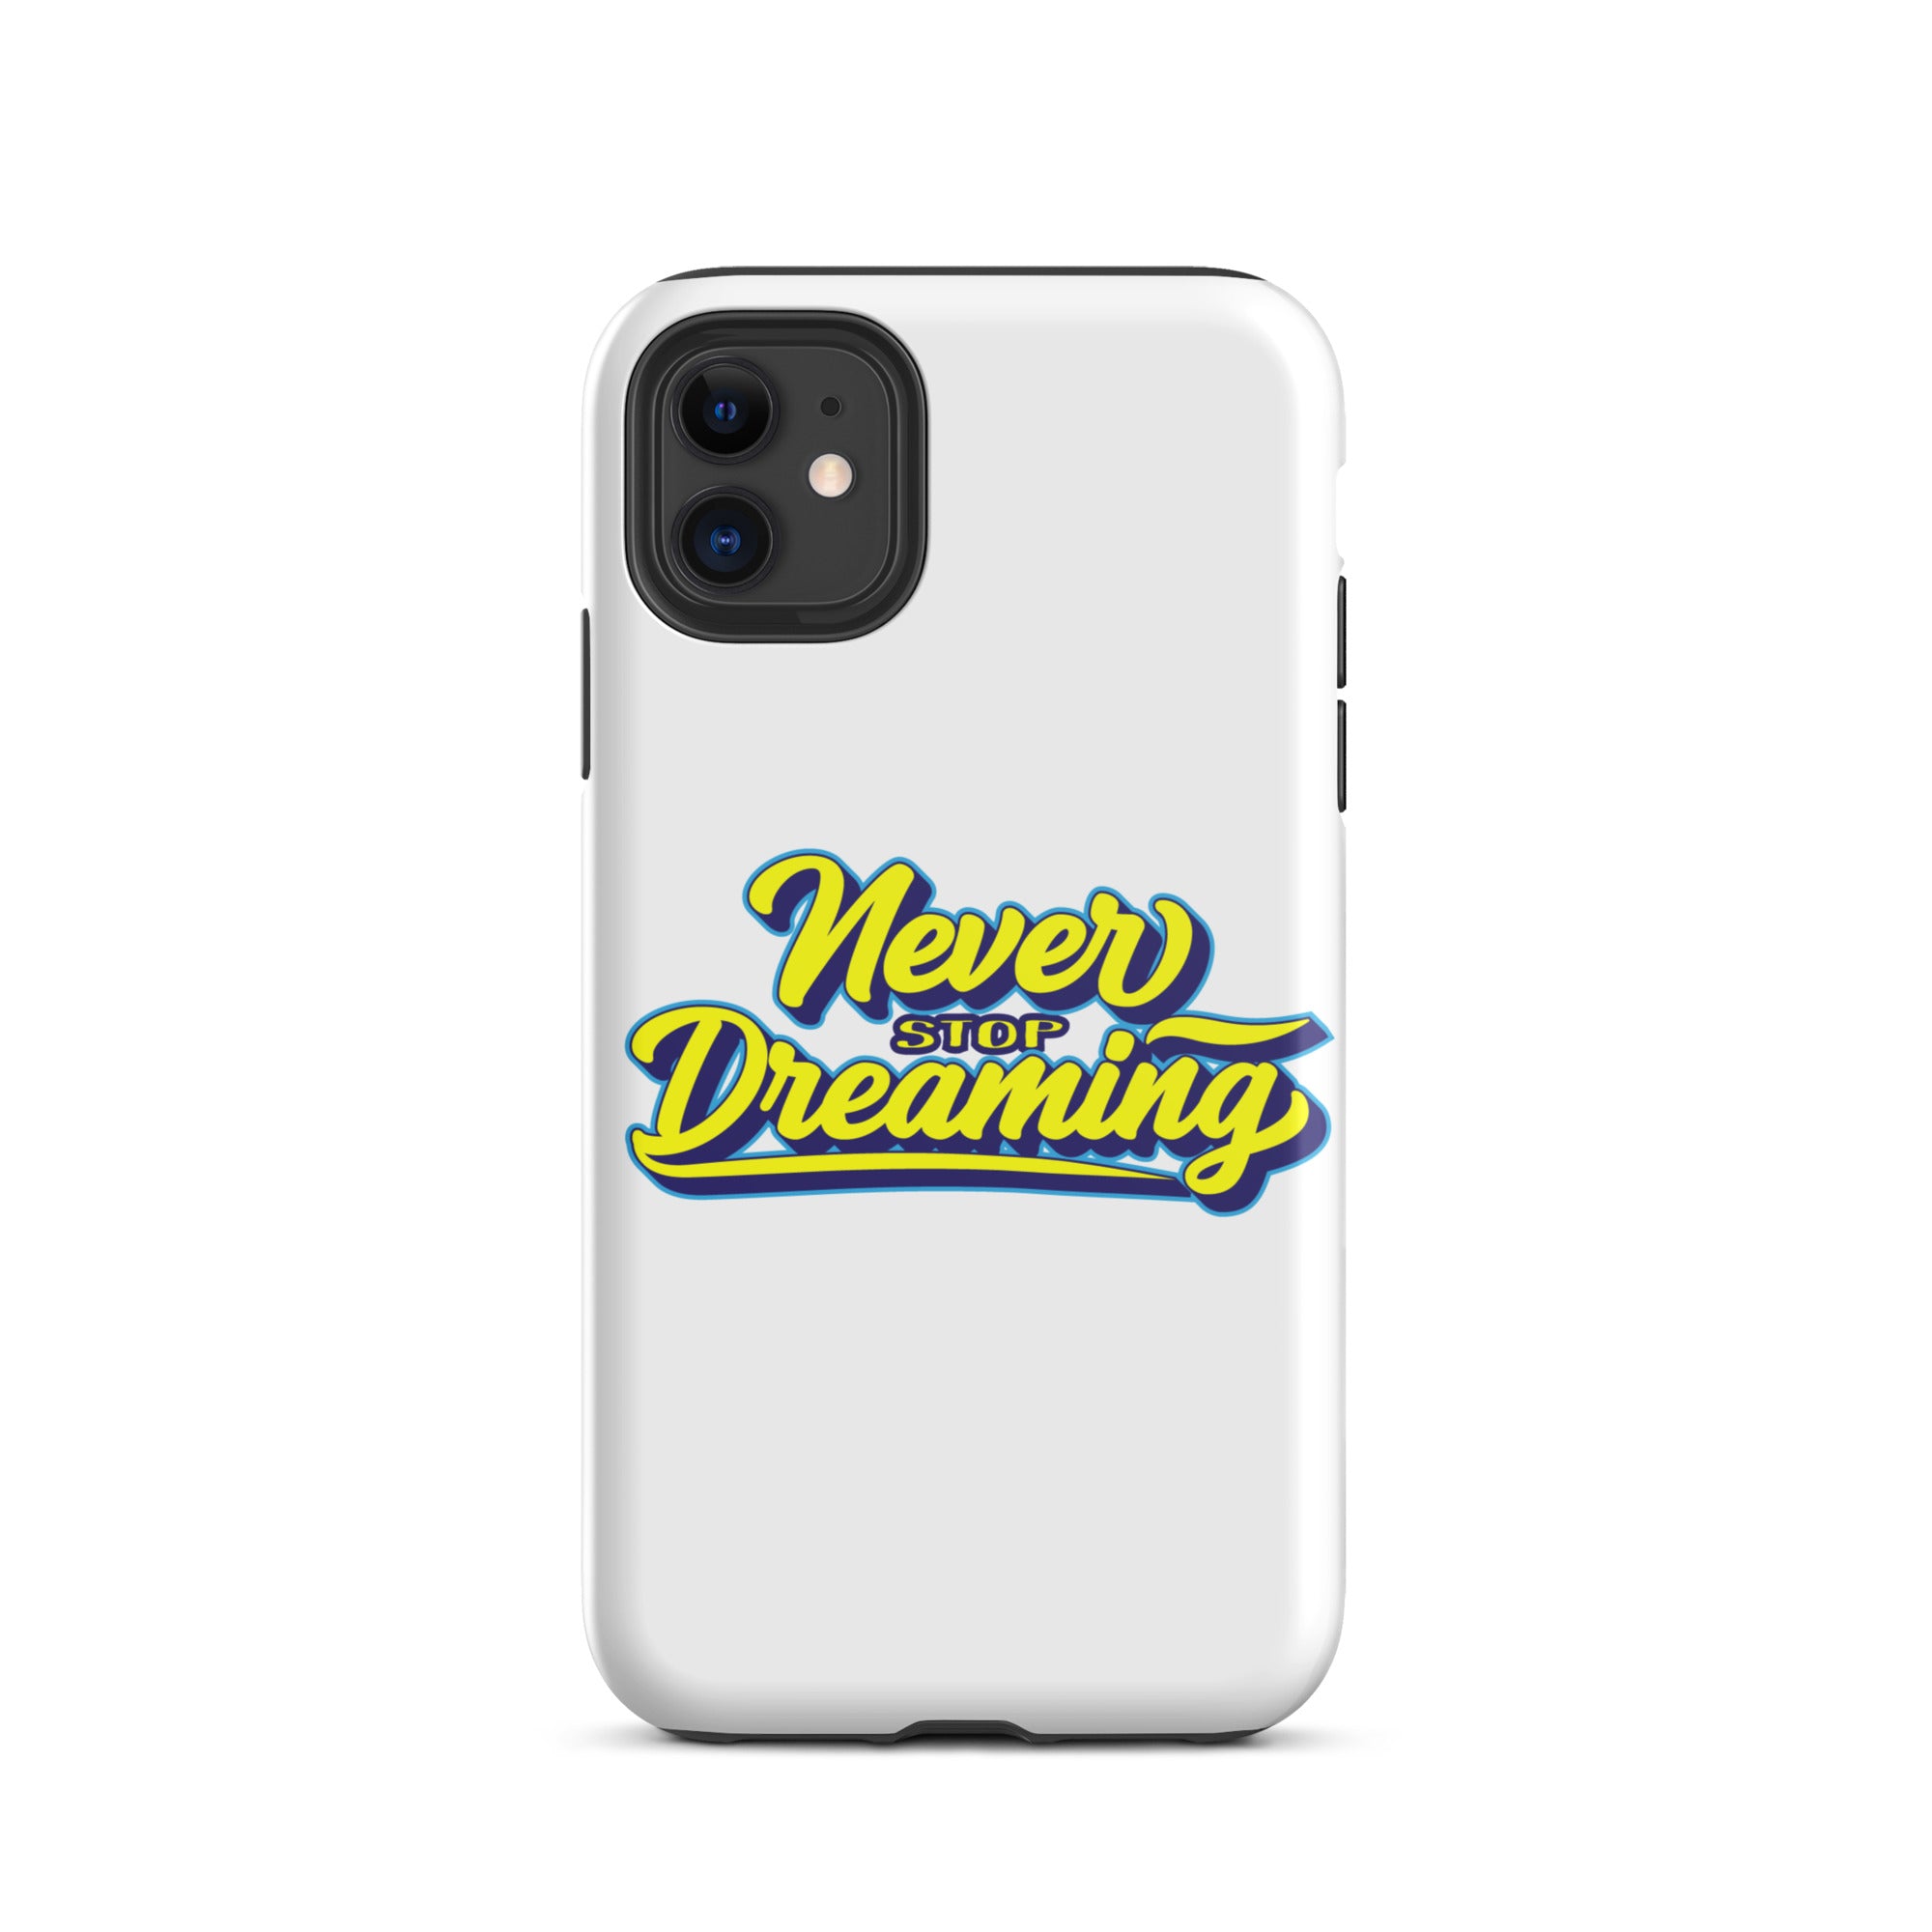 Never Stop Dreaming - Tough iPhone case